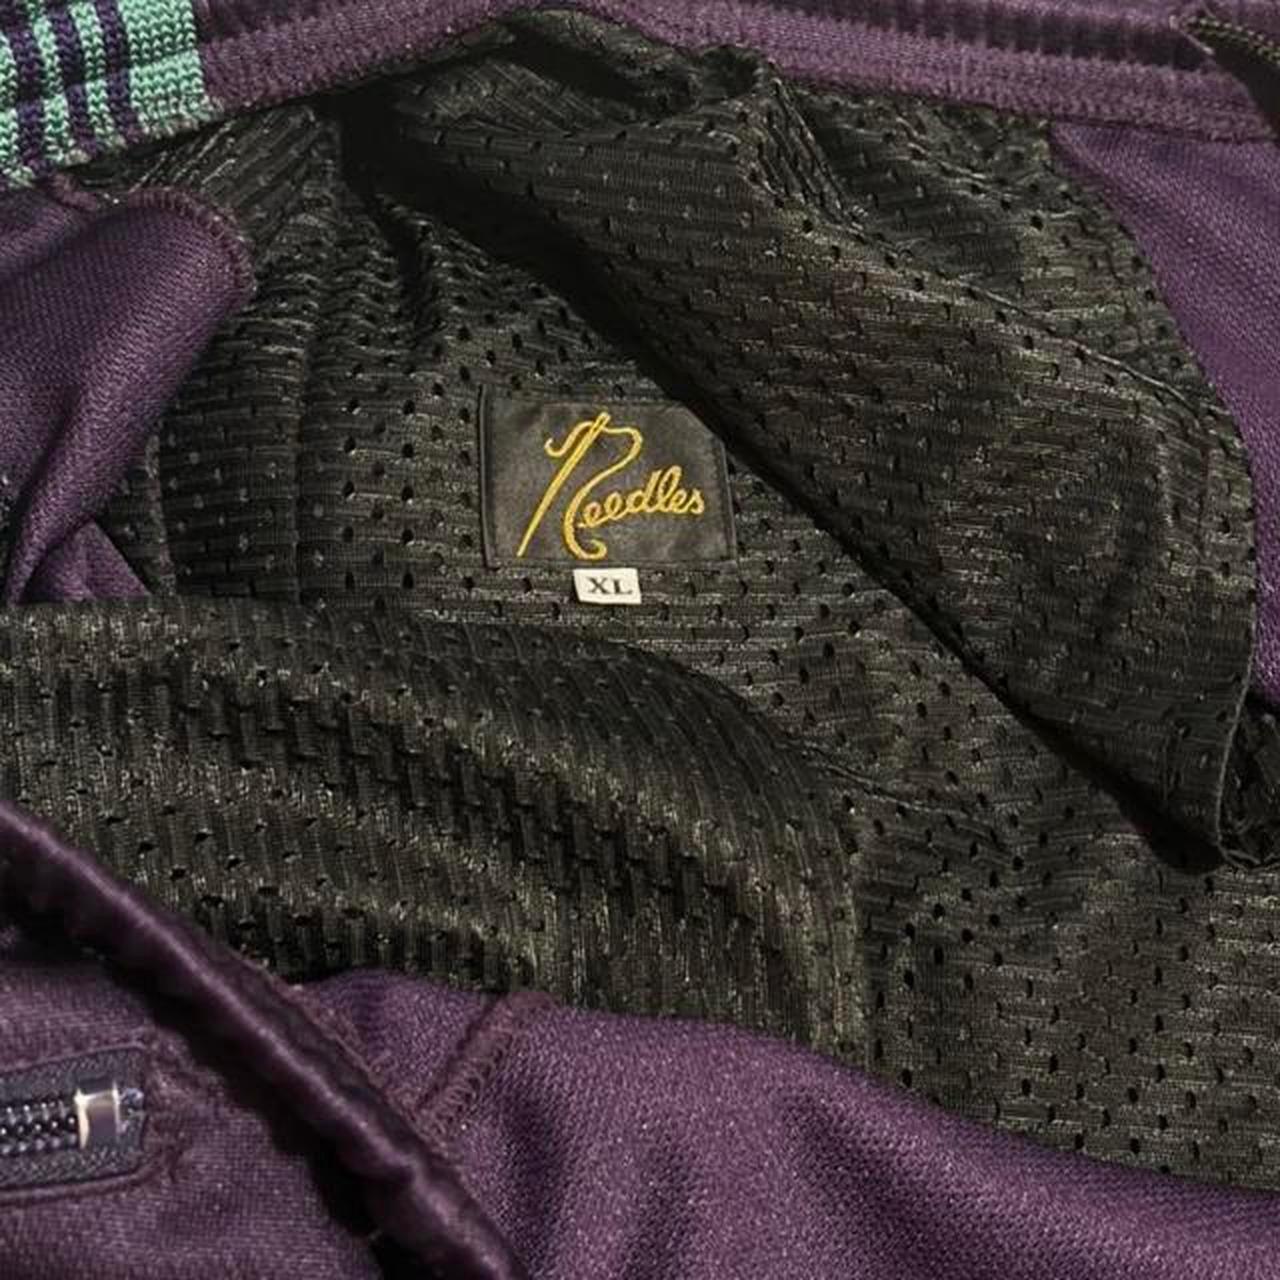 Needles Nepenthes and purple track pants - Known Source